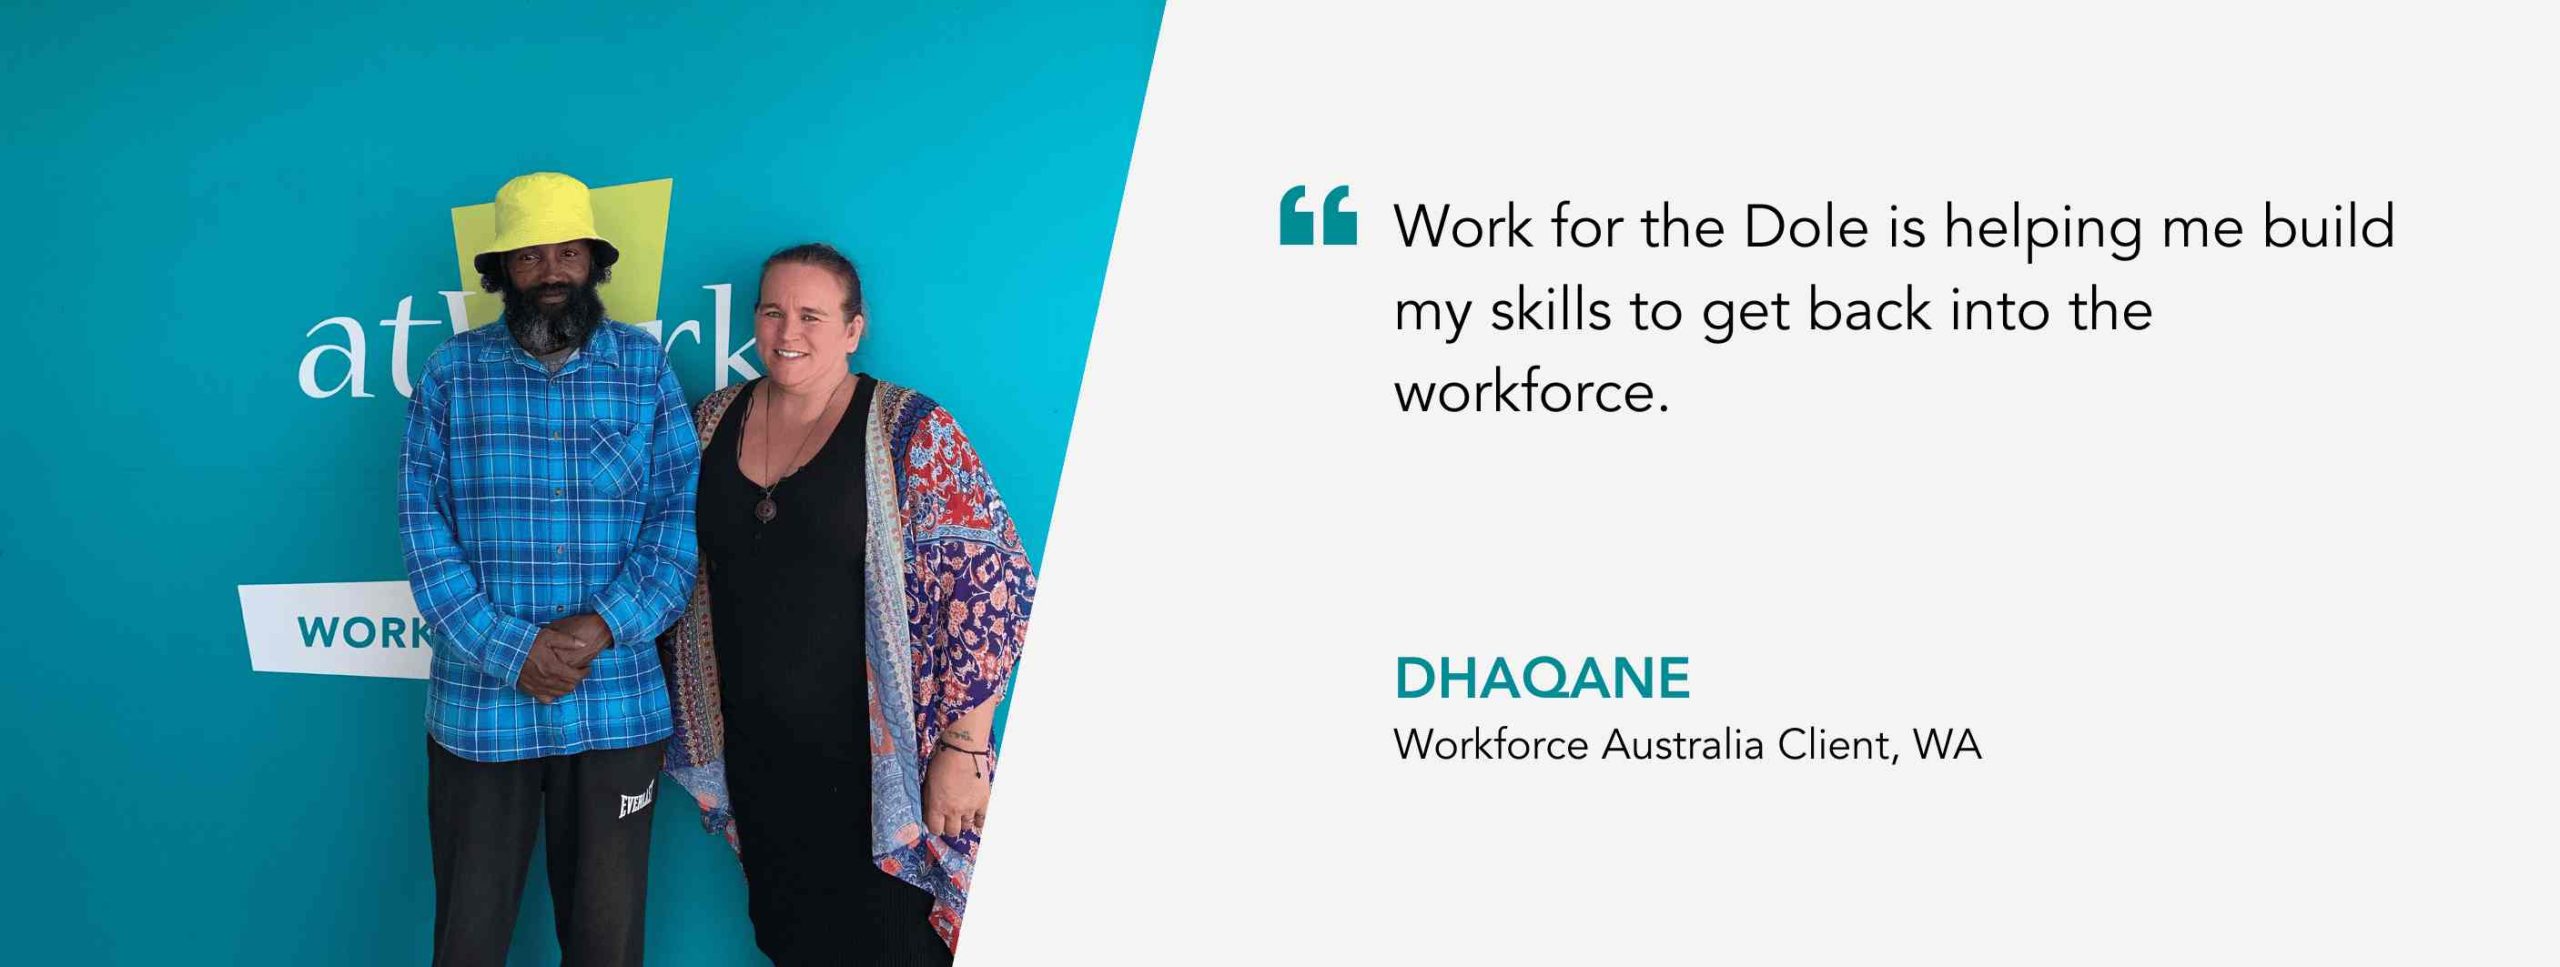 Work for the Dole is helping me build my skills to get back into the workforce. Dhaqane, Workforce Australia Client, WA.